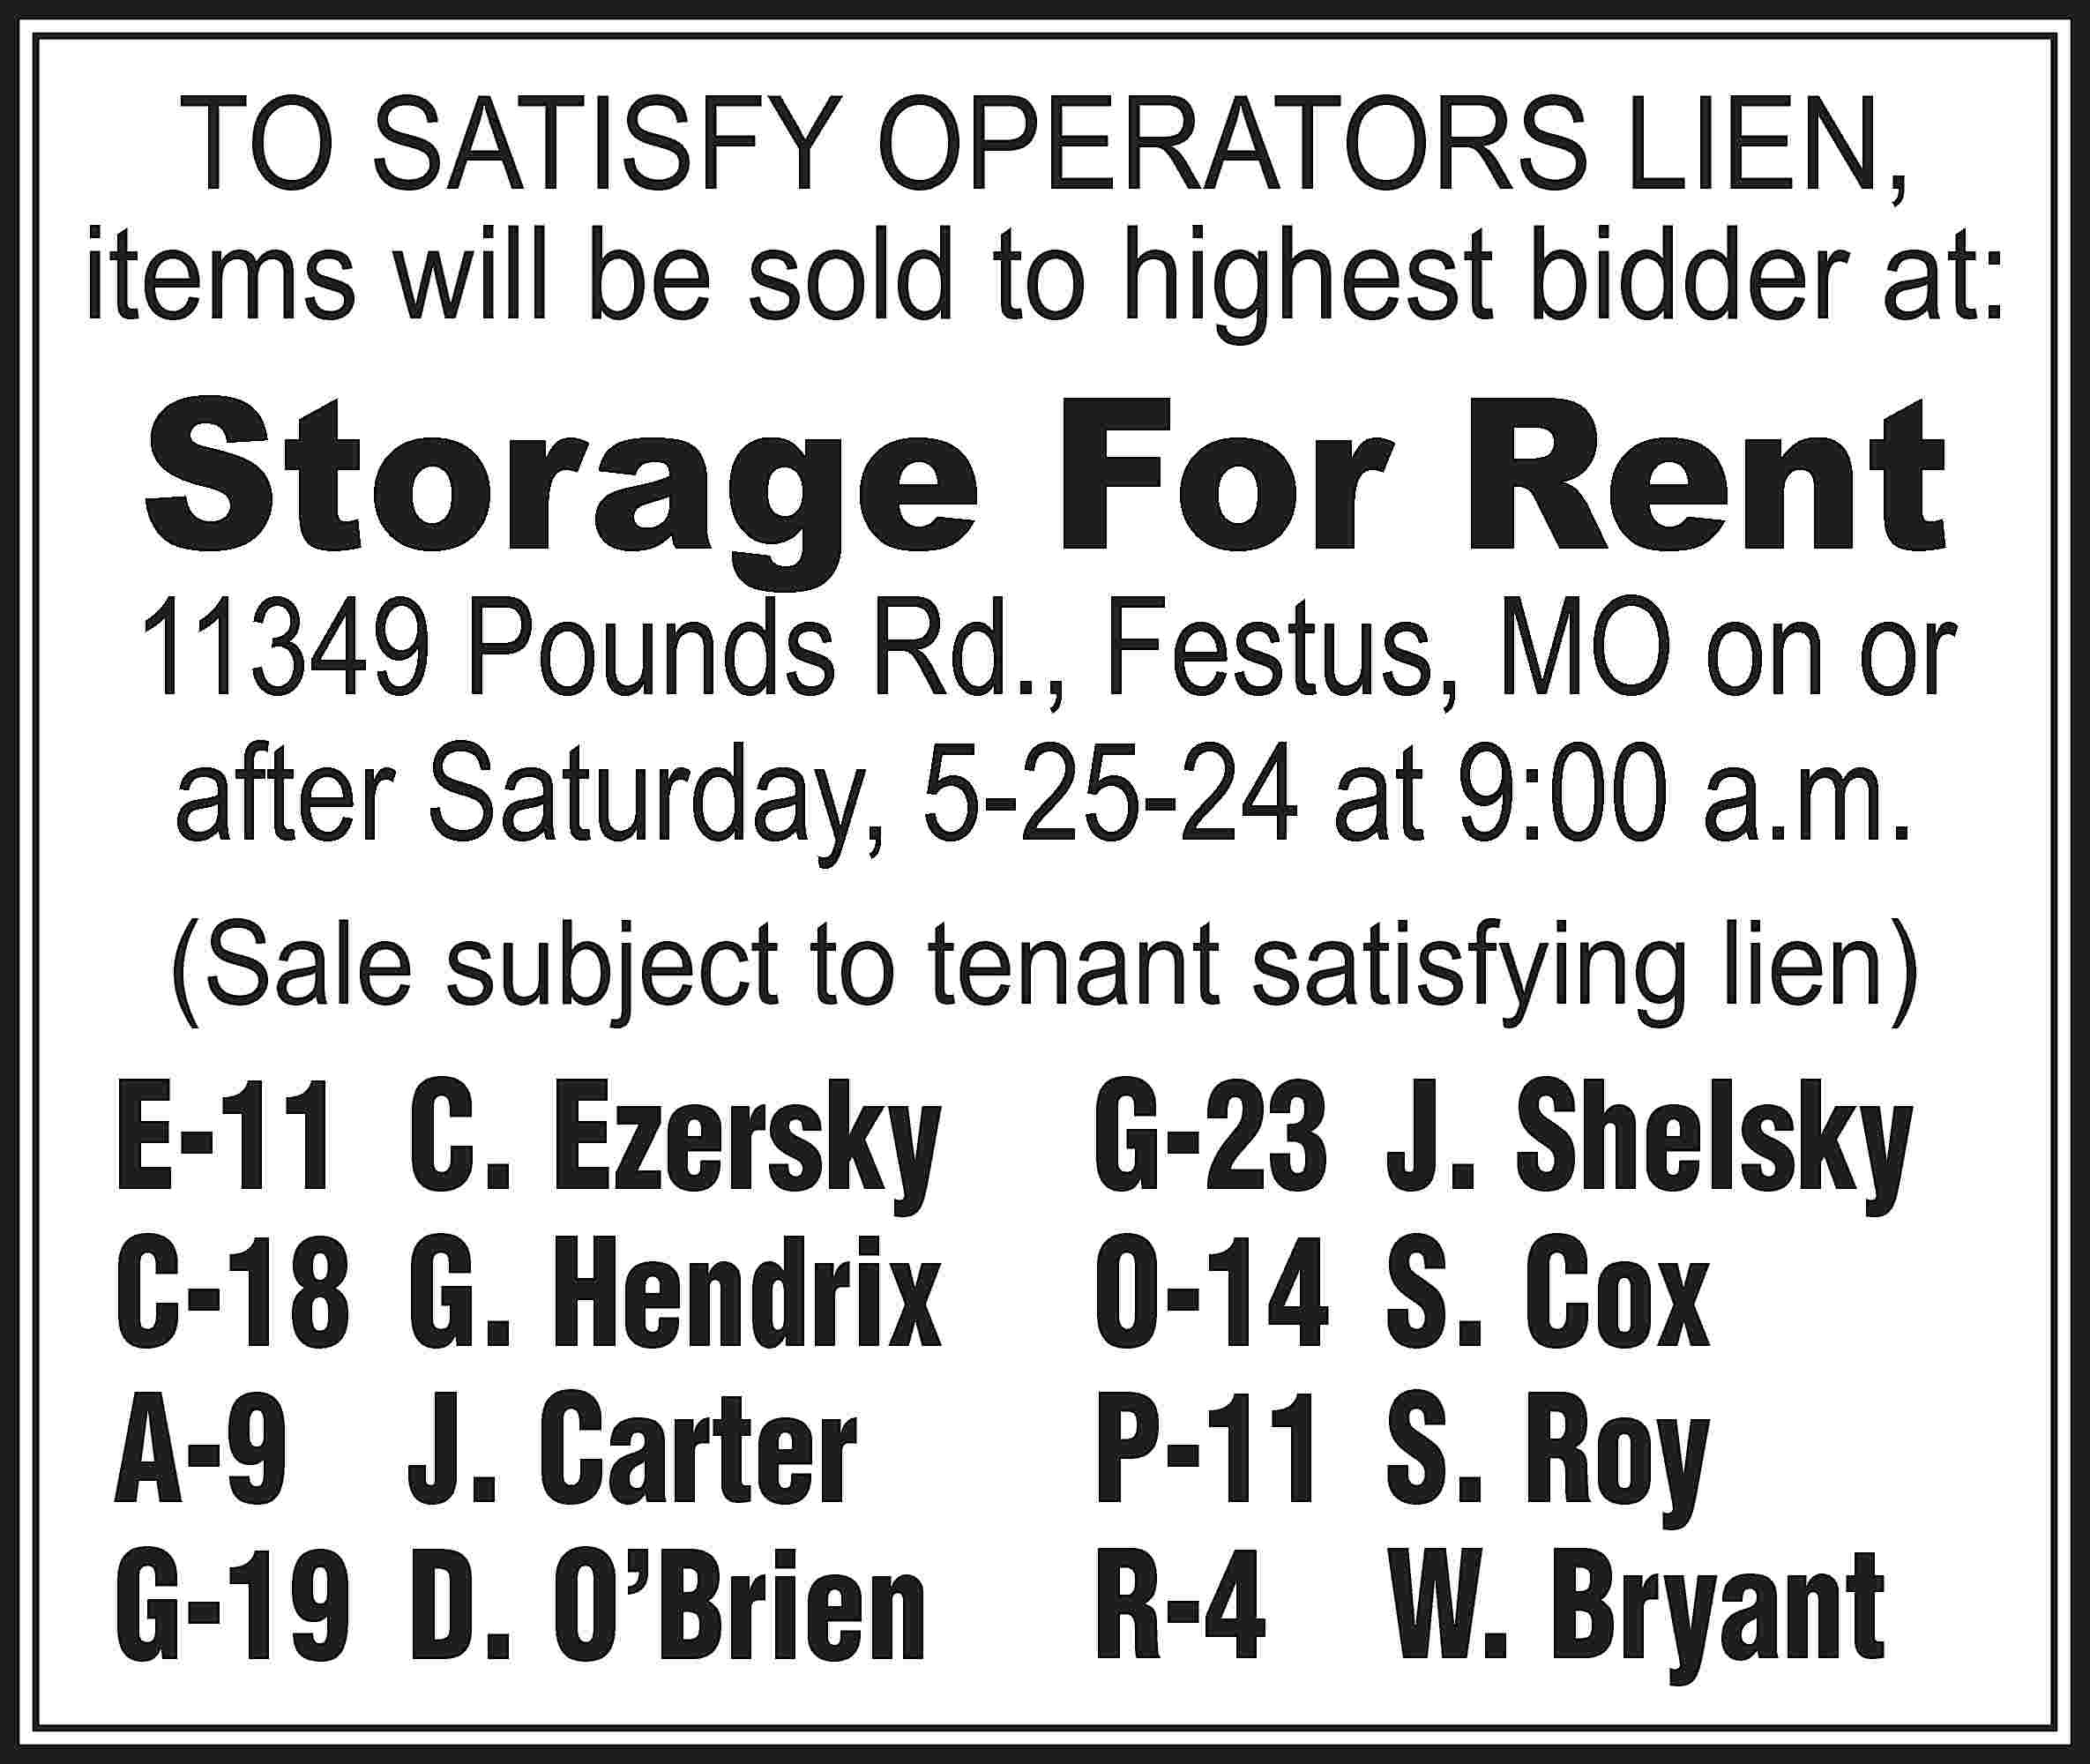 TO SATISFY OPERATORS LIEN, items  TO SATISFY OPERATORS LIEN, items will be sold to highest bidder at: Storage For Rent 11349 Pounds Rd., Festus, MO on or after Saturday, 5-25-24 at 9:00 a.m. (Sale subject to tenant satisfying lien) E-11	 C. Ezersky C-18	 G. Hendrix A-9	 J. Carter G-19	 D. O’Brien G-23	 J. Shelsky O-14	 S. Cox P-11	 S. Roy R-4	 W. Bryant